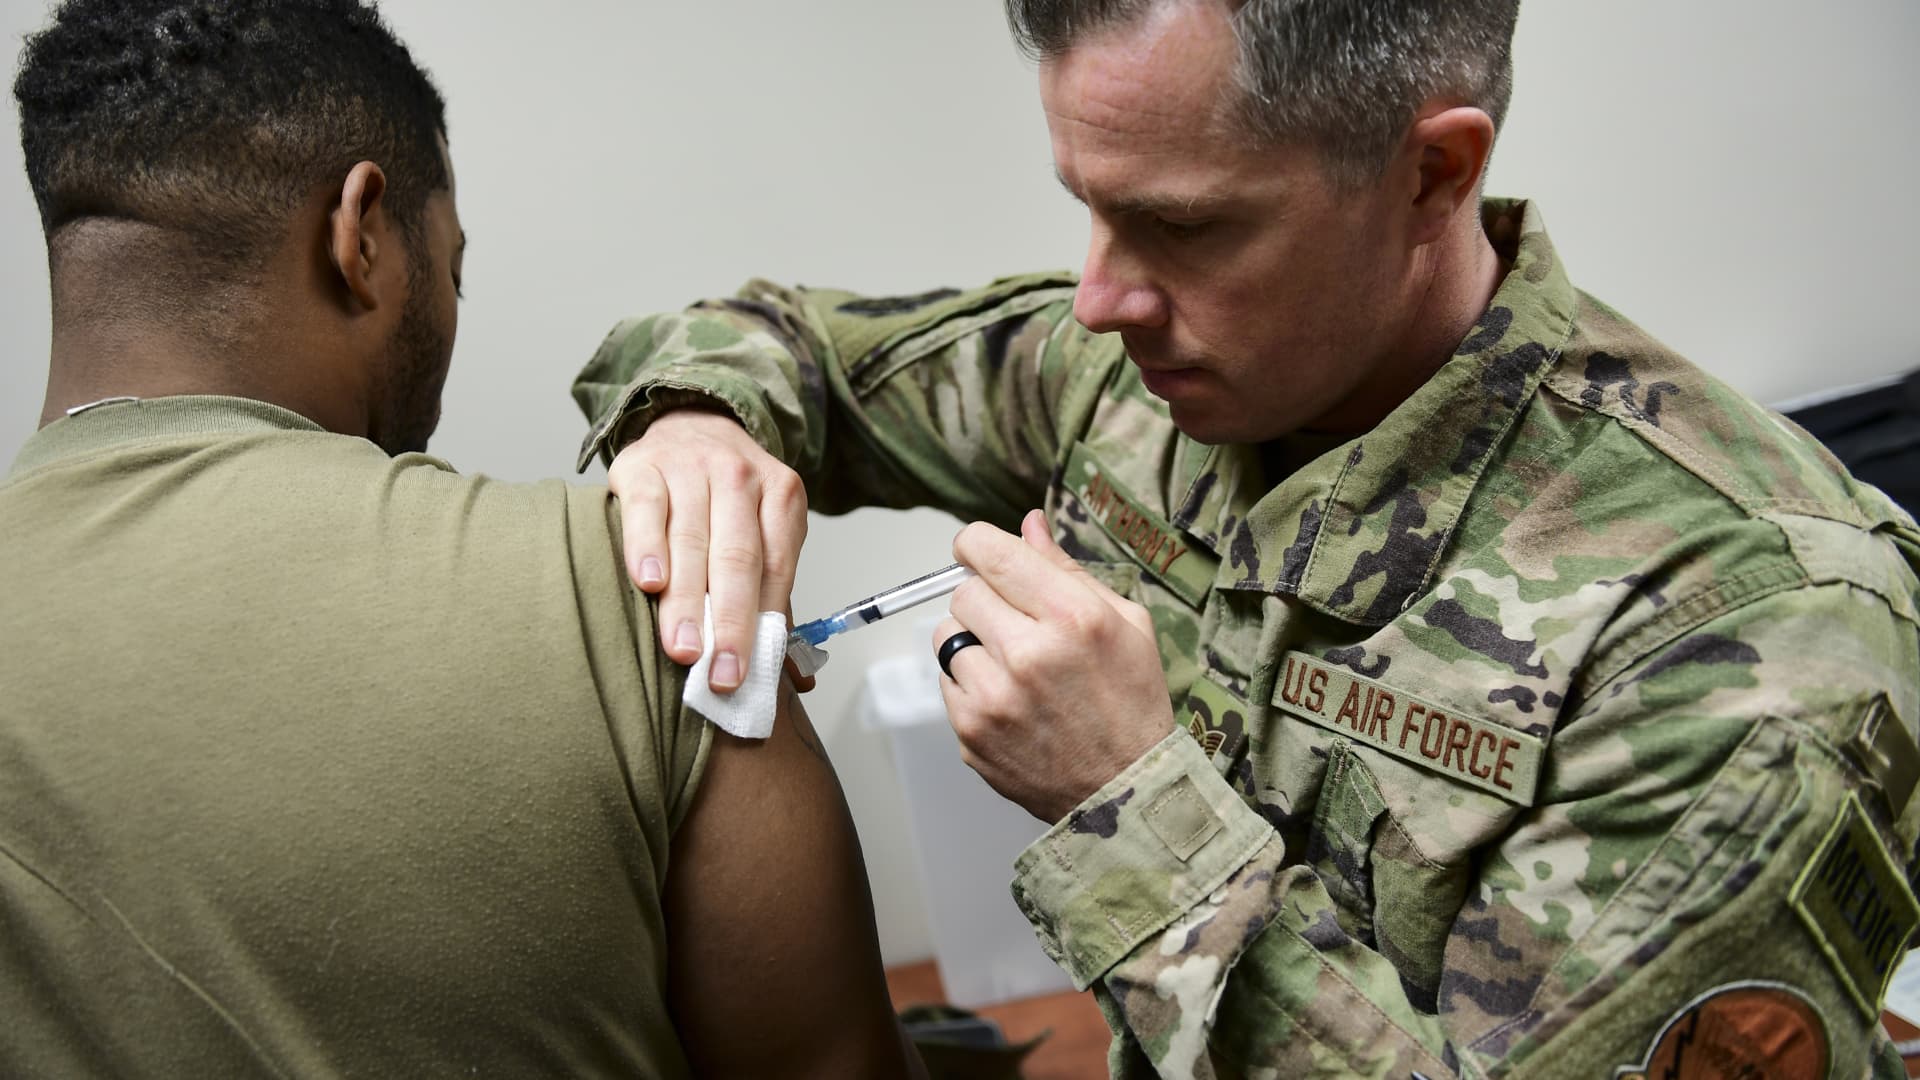 A medical technician administers a vaccination to a member of the U.S. Army Reserve's 336 Engineering Company Command and Control.